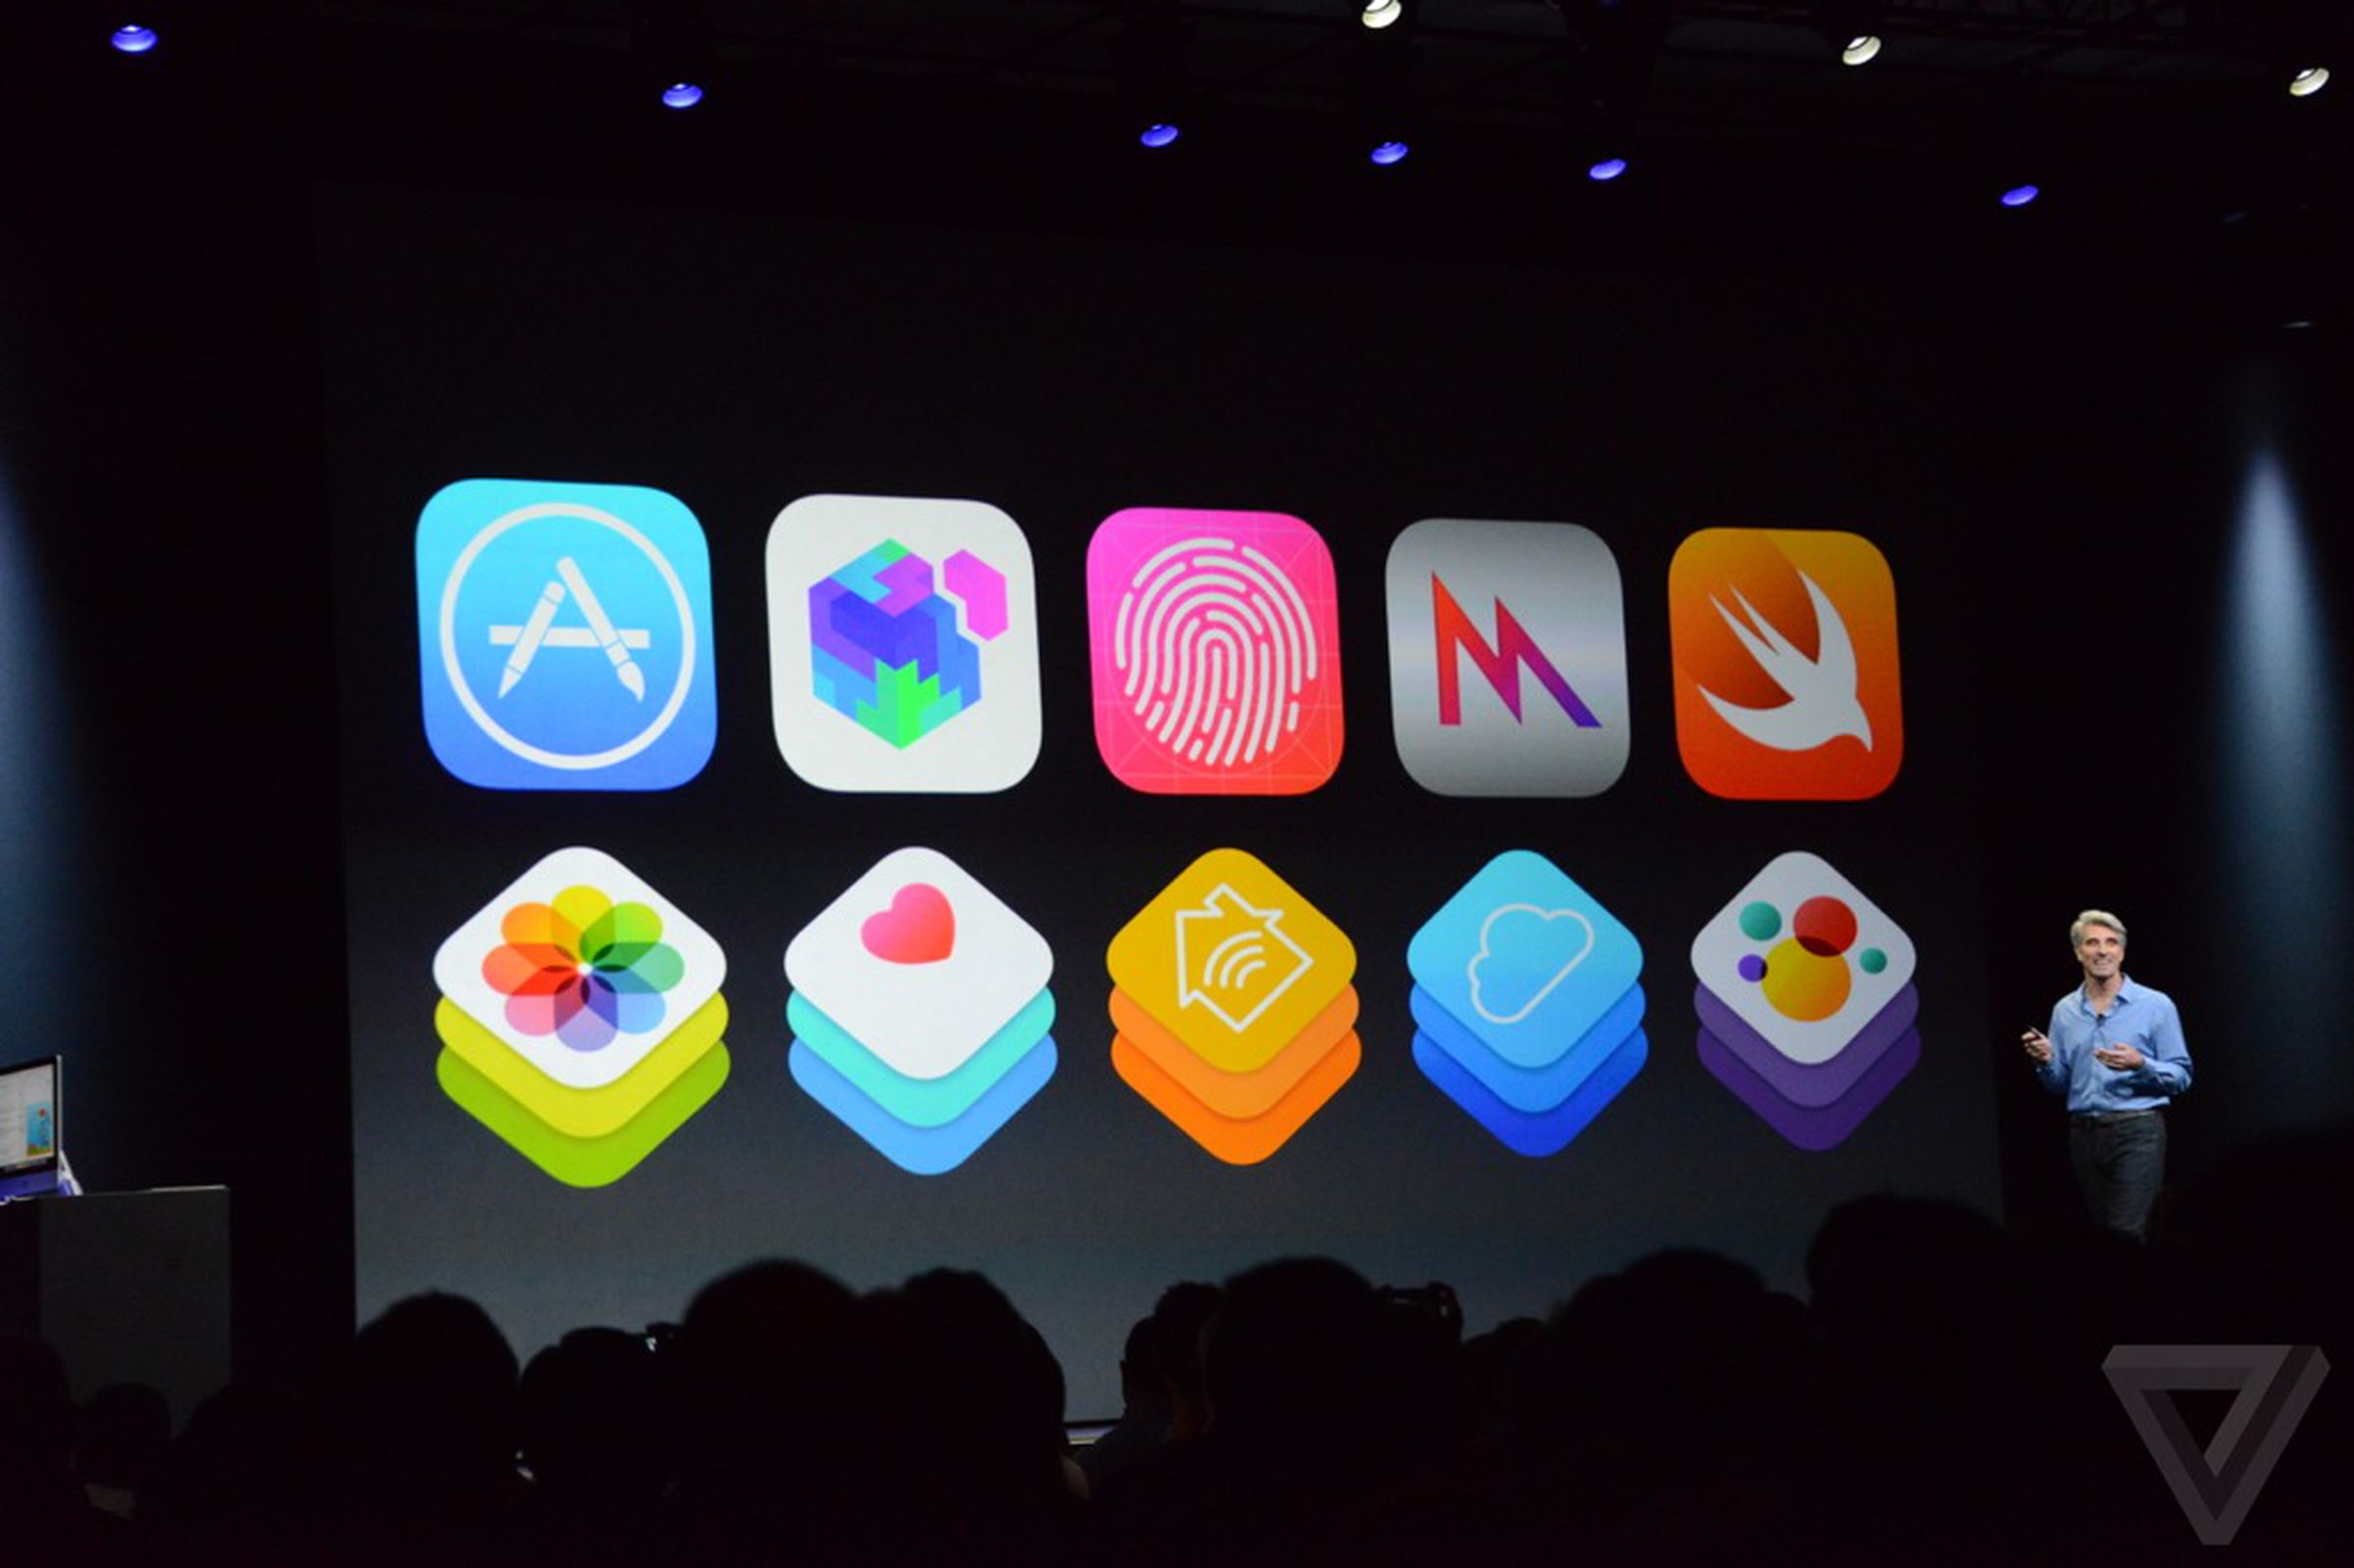 WWDC 2014 best moments photo gallery